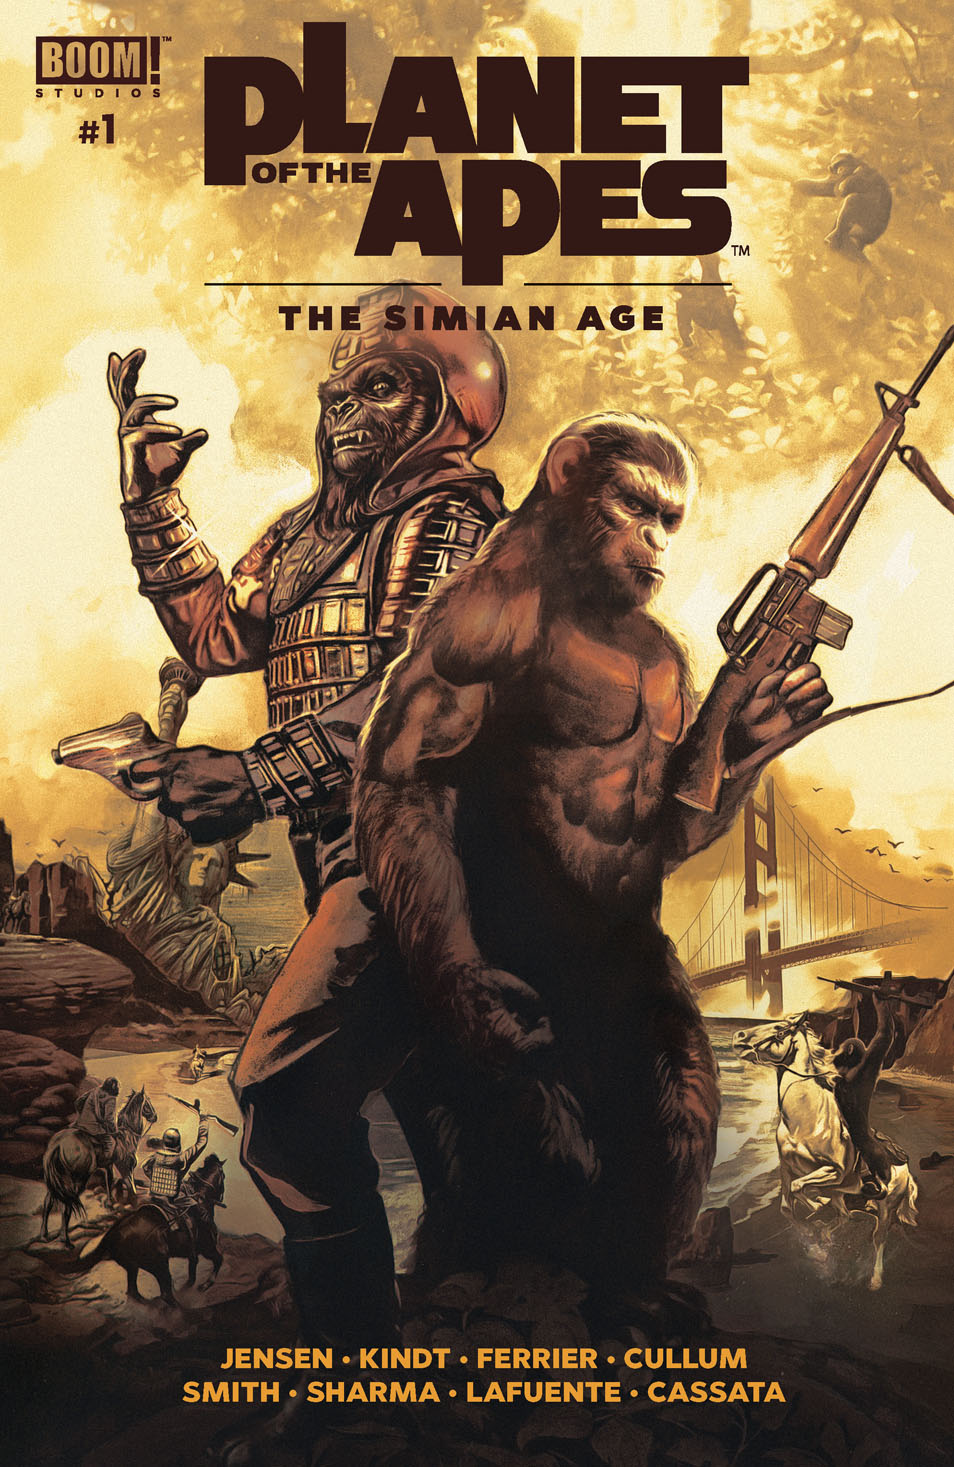 This image is the cover for the book Planet of the Apes: The Simian Age #1, Planet of the Apes